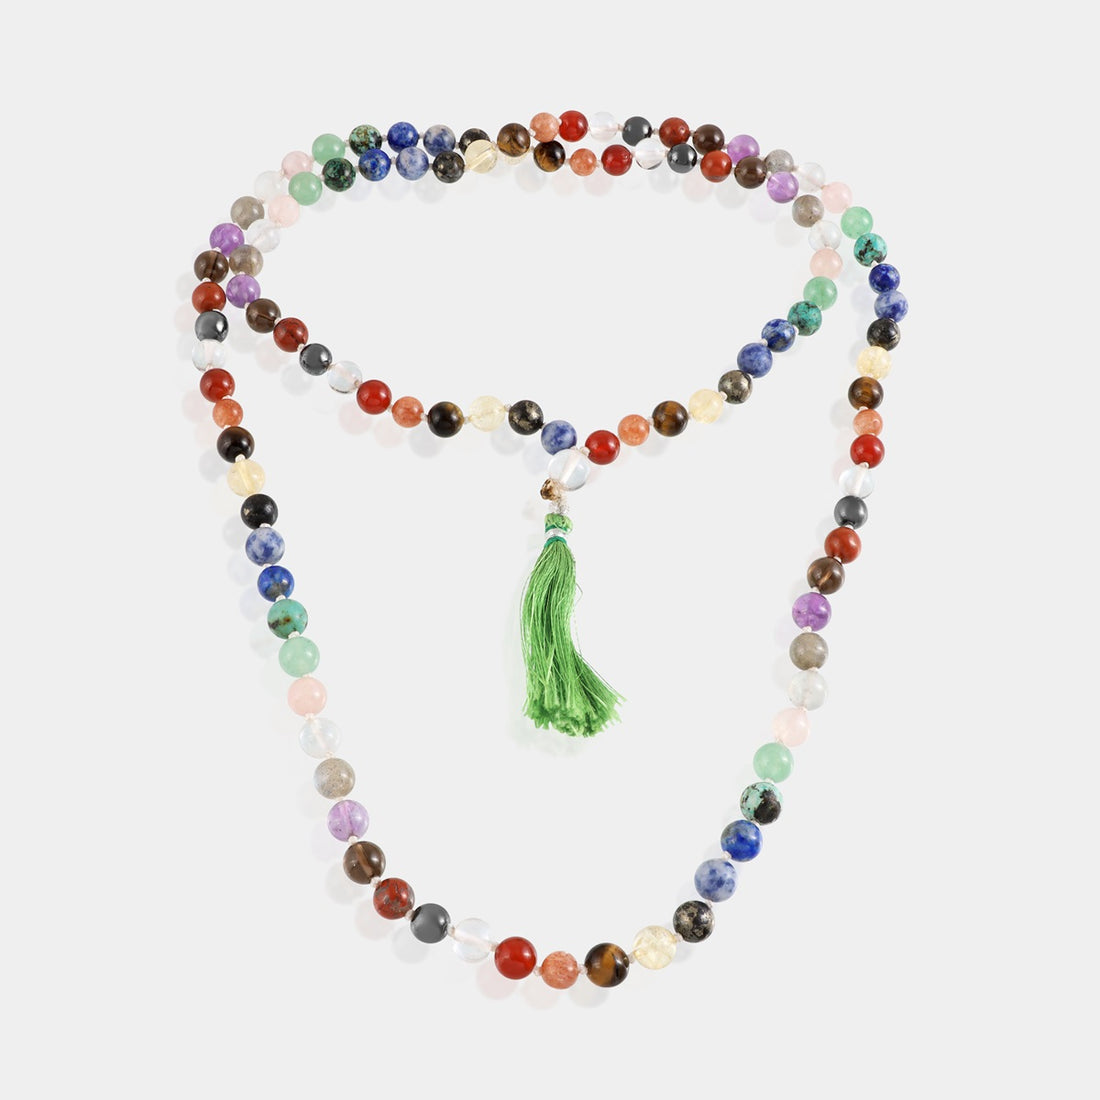 Chakra Balancing Mala: Smooth round beads for tactile experience